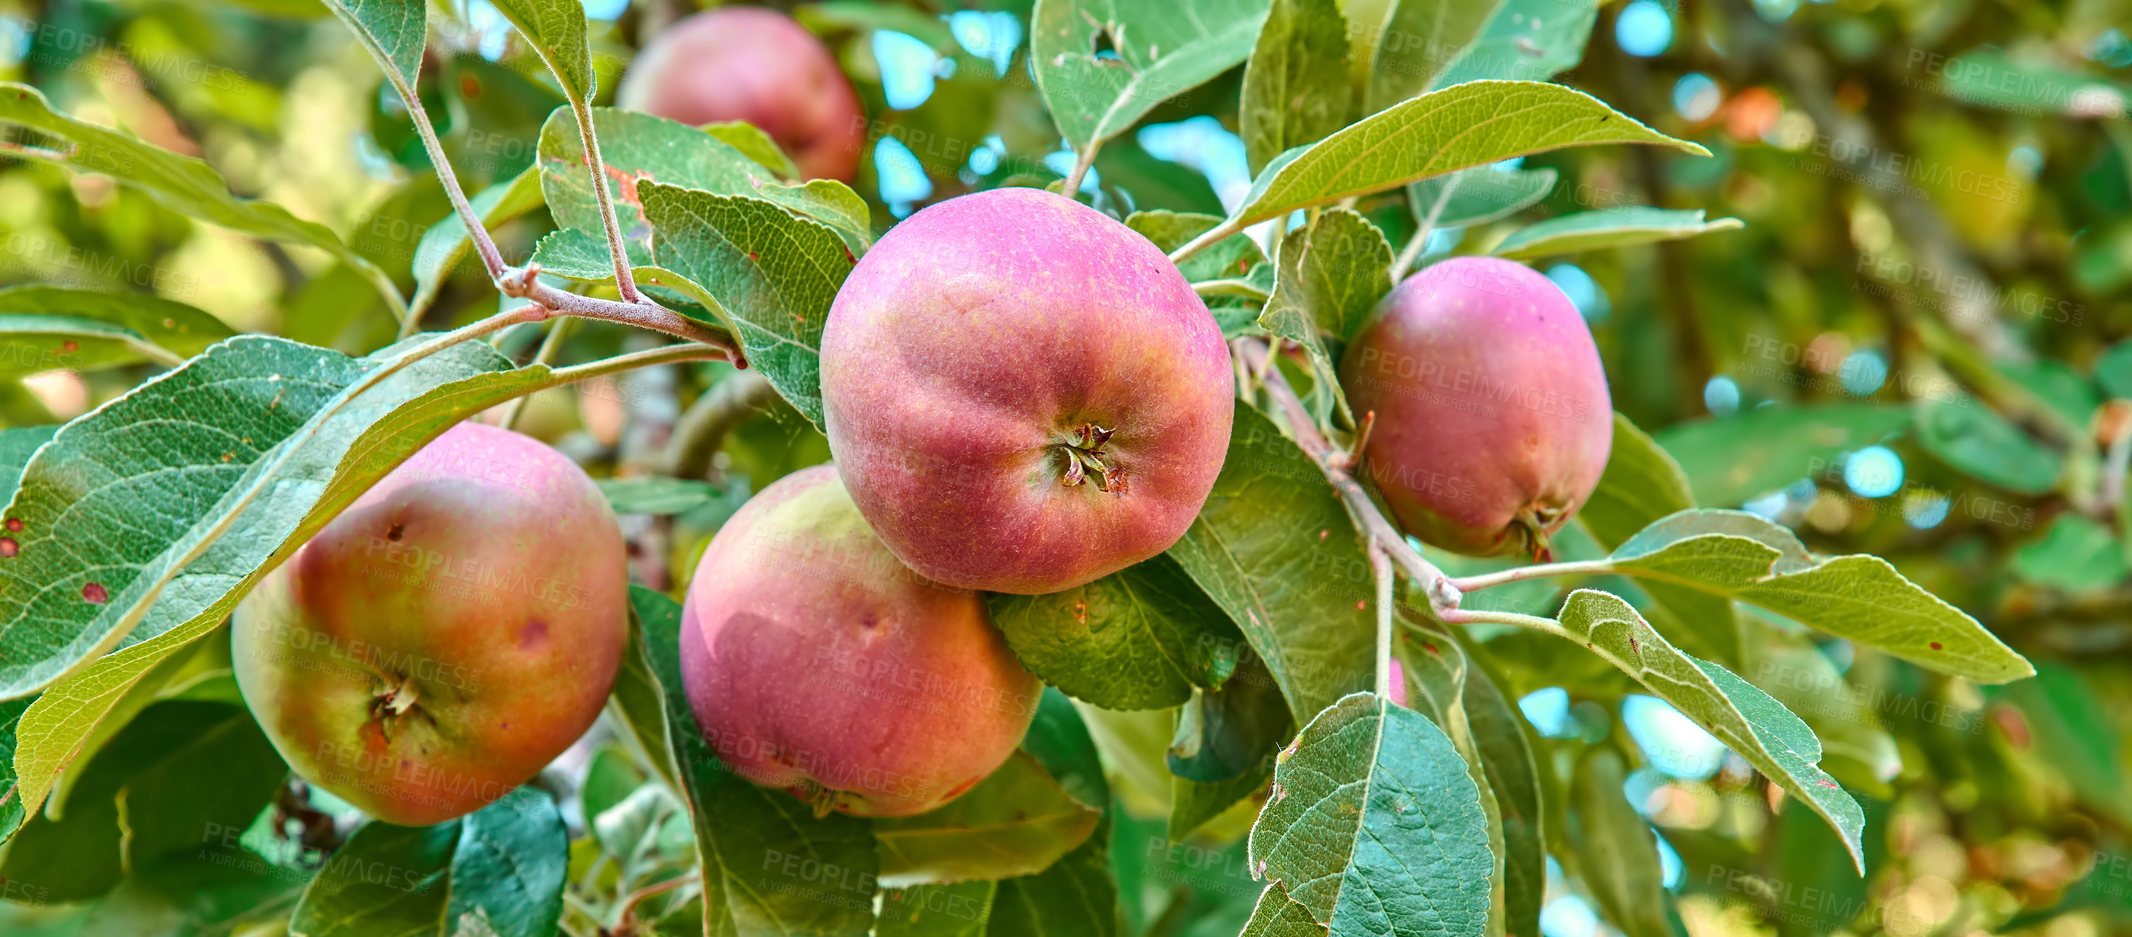 Buy stock photo Beautiful ripe apples ready to be harvested and sold to supermarkets. Delicious and nutritious Honeycrisp fruit on a tree to be gathered and collected as organic and fresh produce for sale at shops